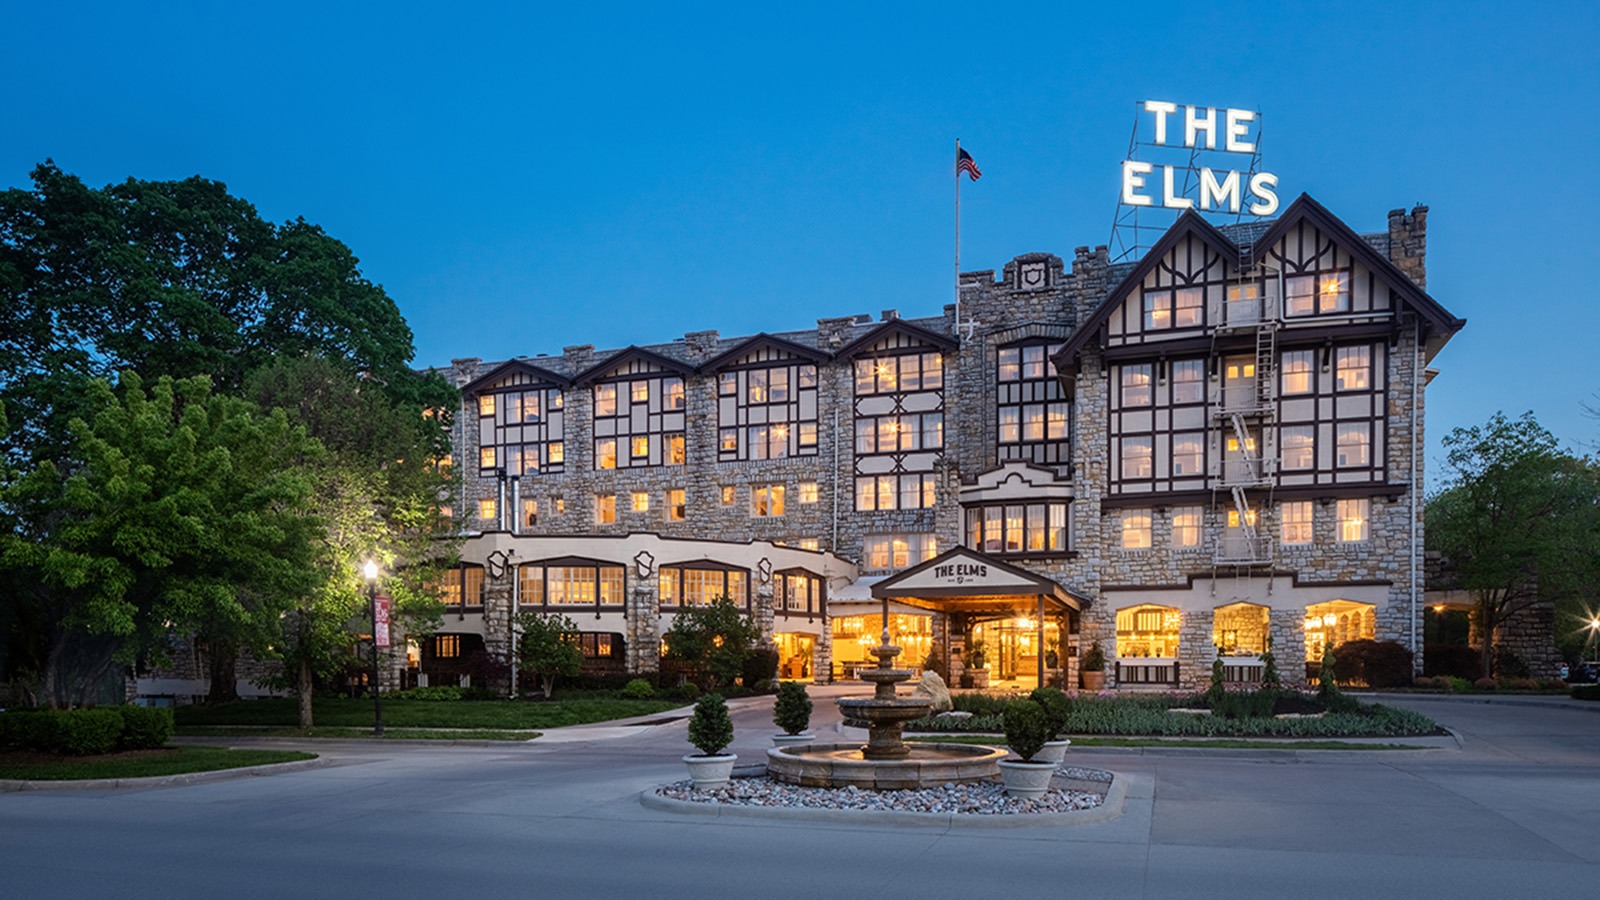 The Elms Hotel and Spa exterior